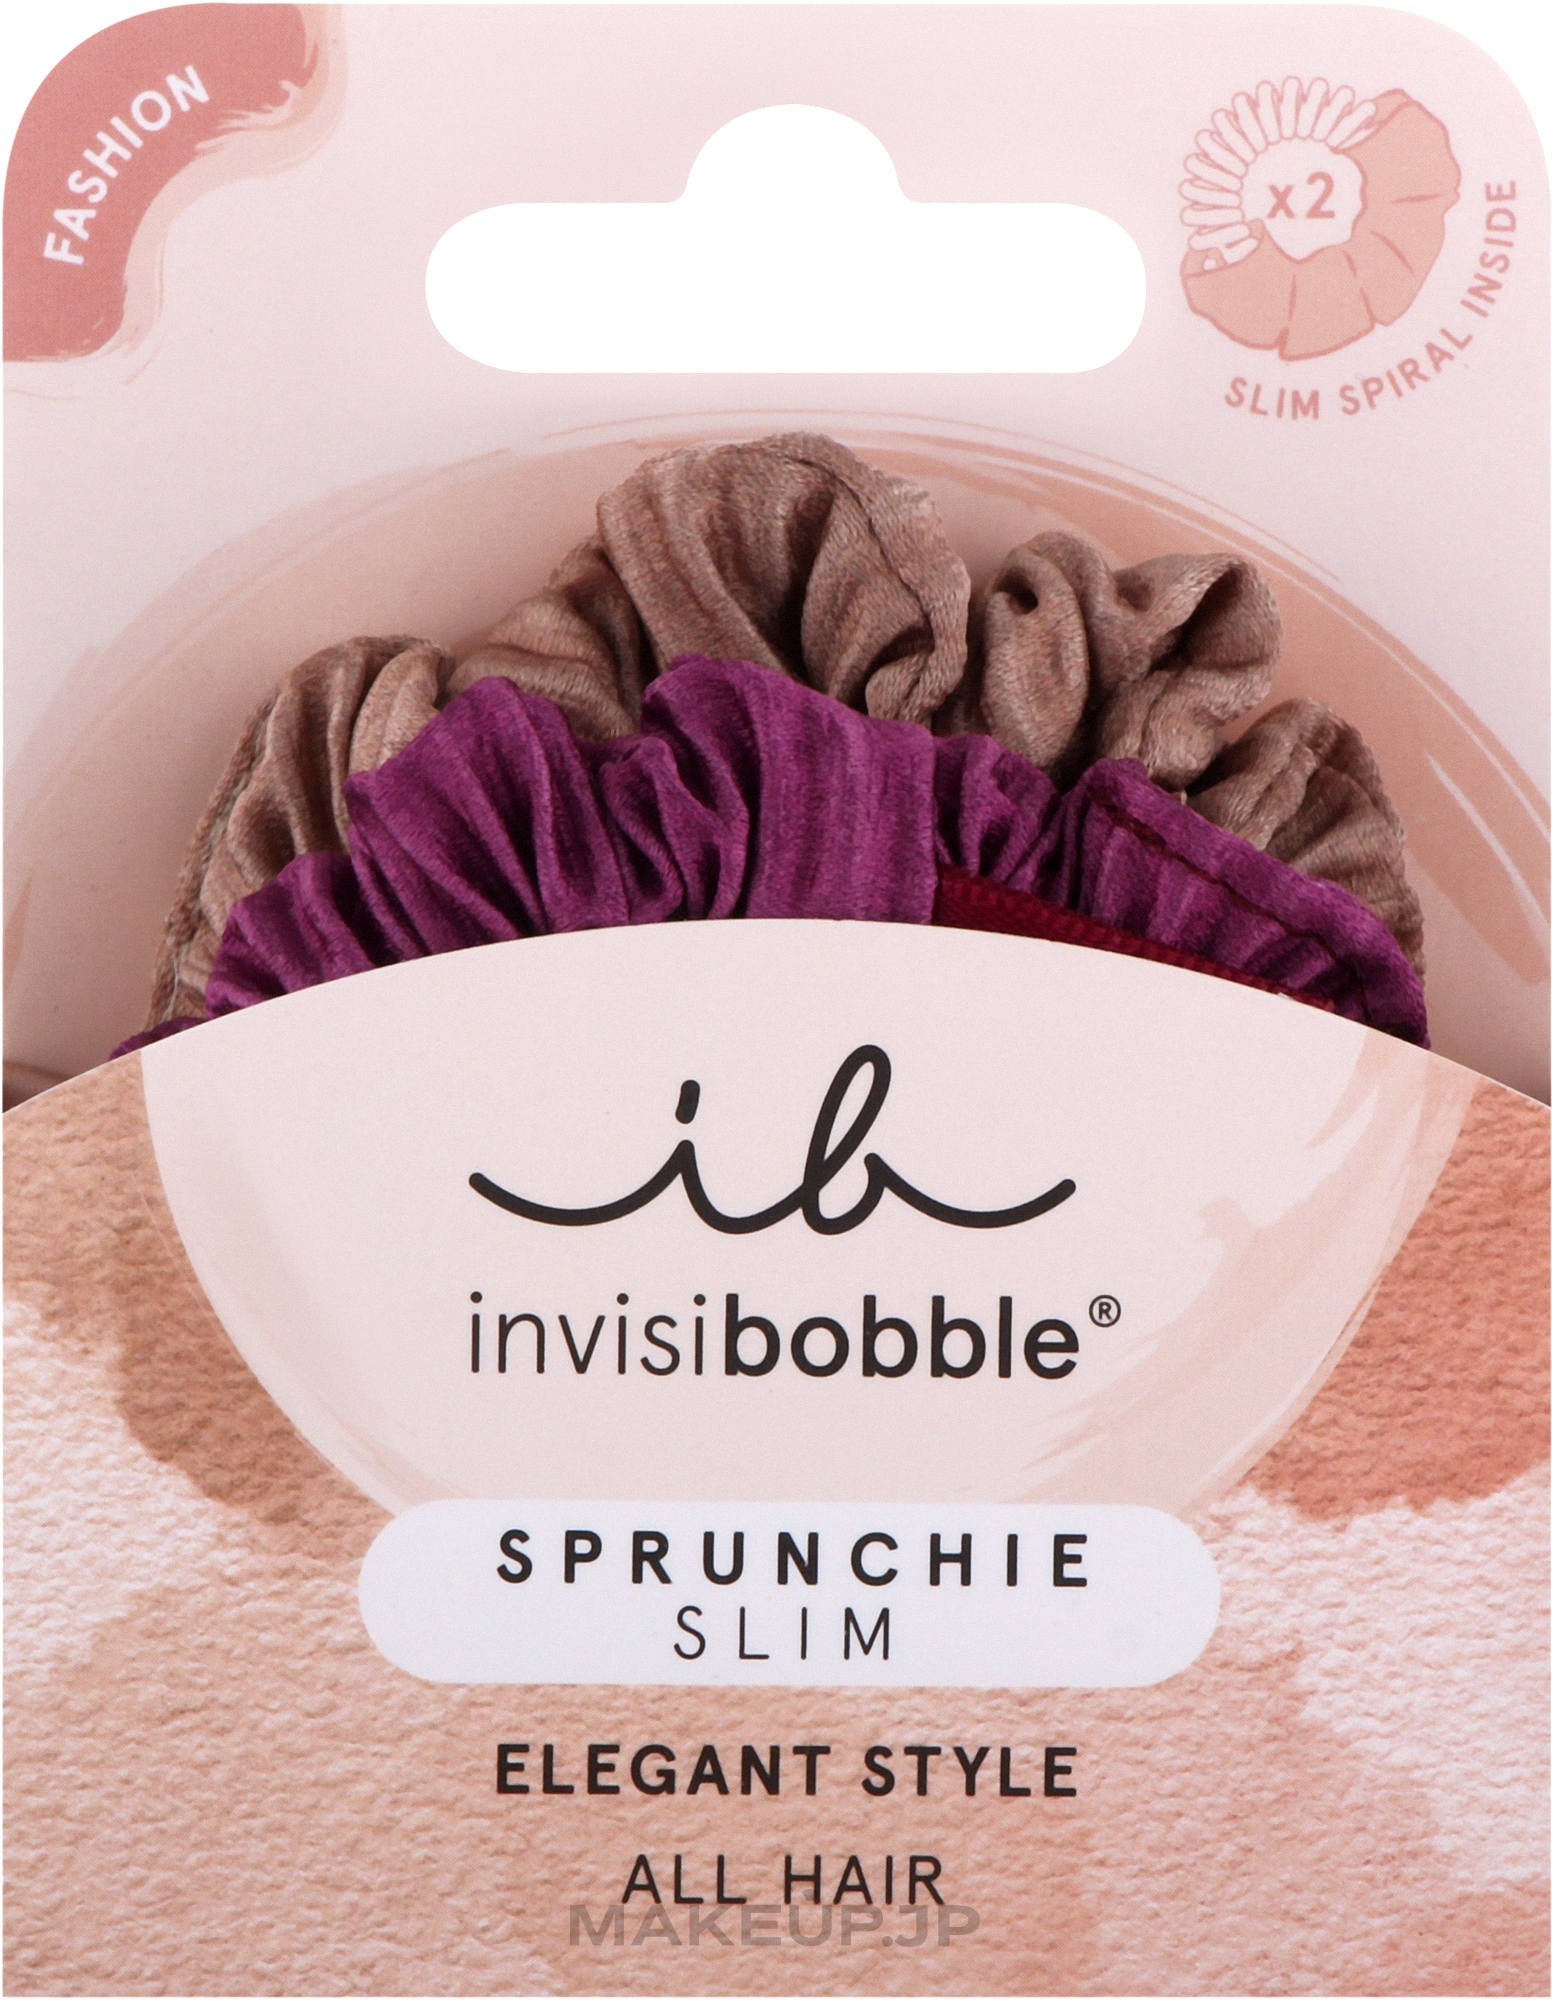 Hair Band - Invisibobble Sprunchie Slim The Snuggle is Real	 — photo 2 szt.